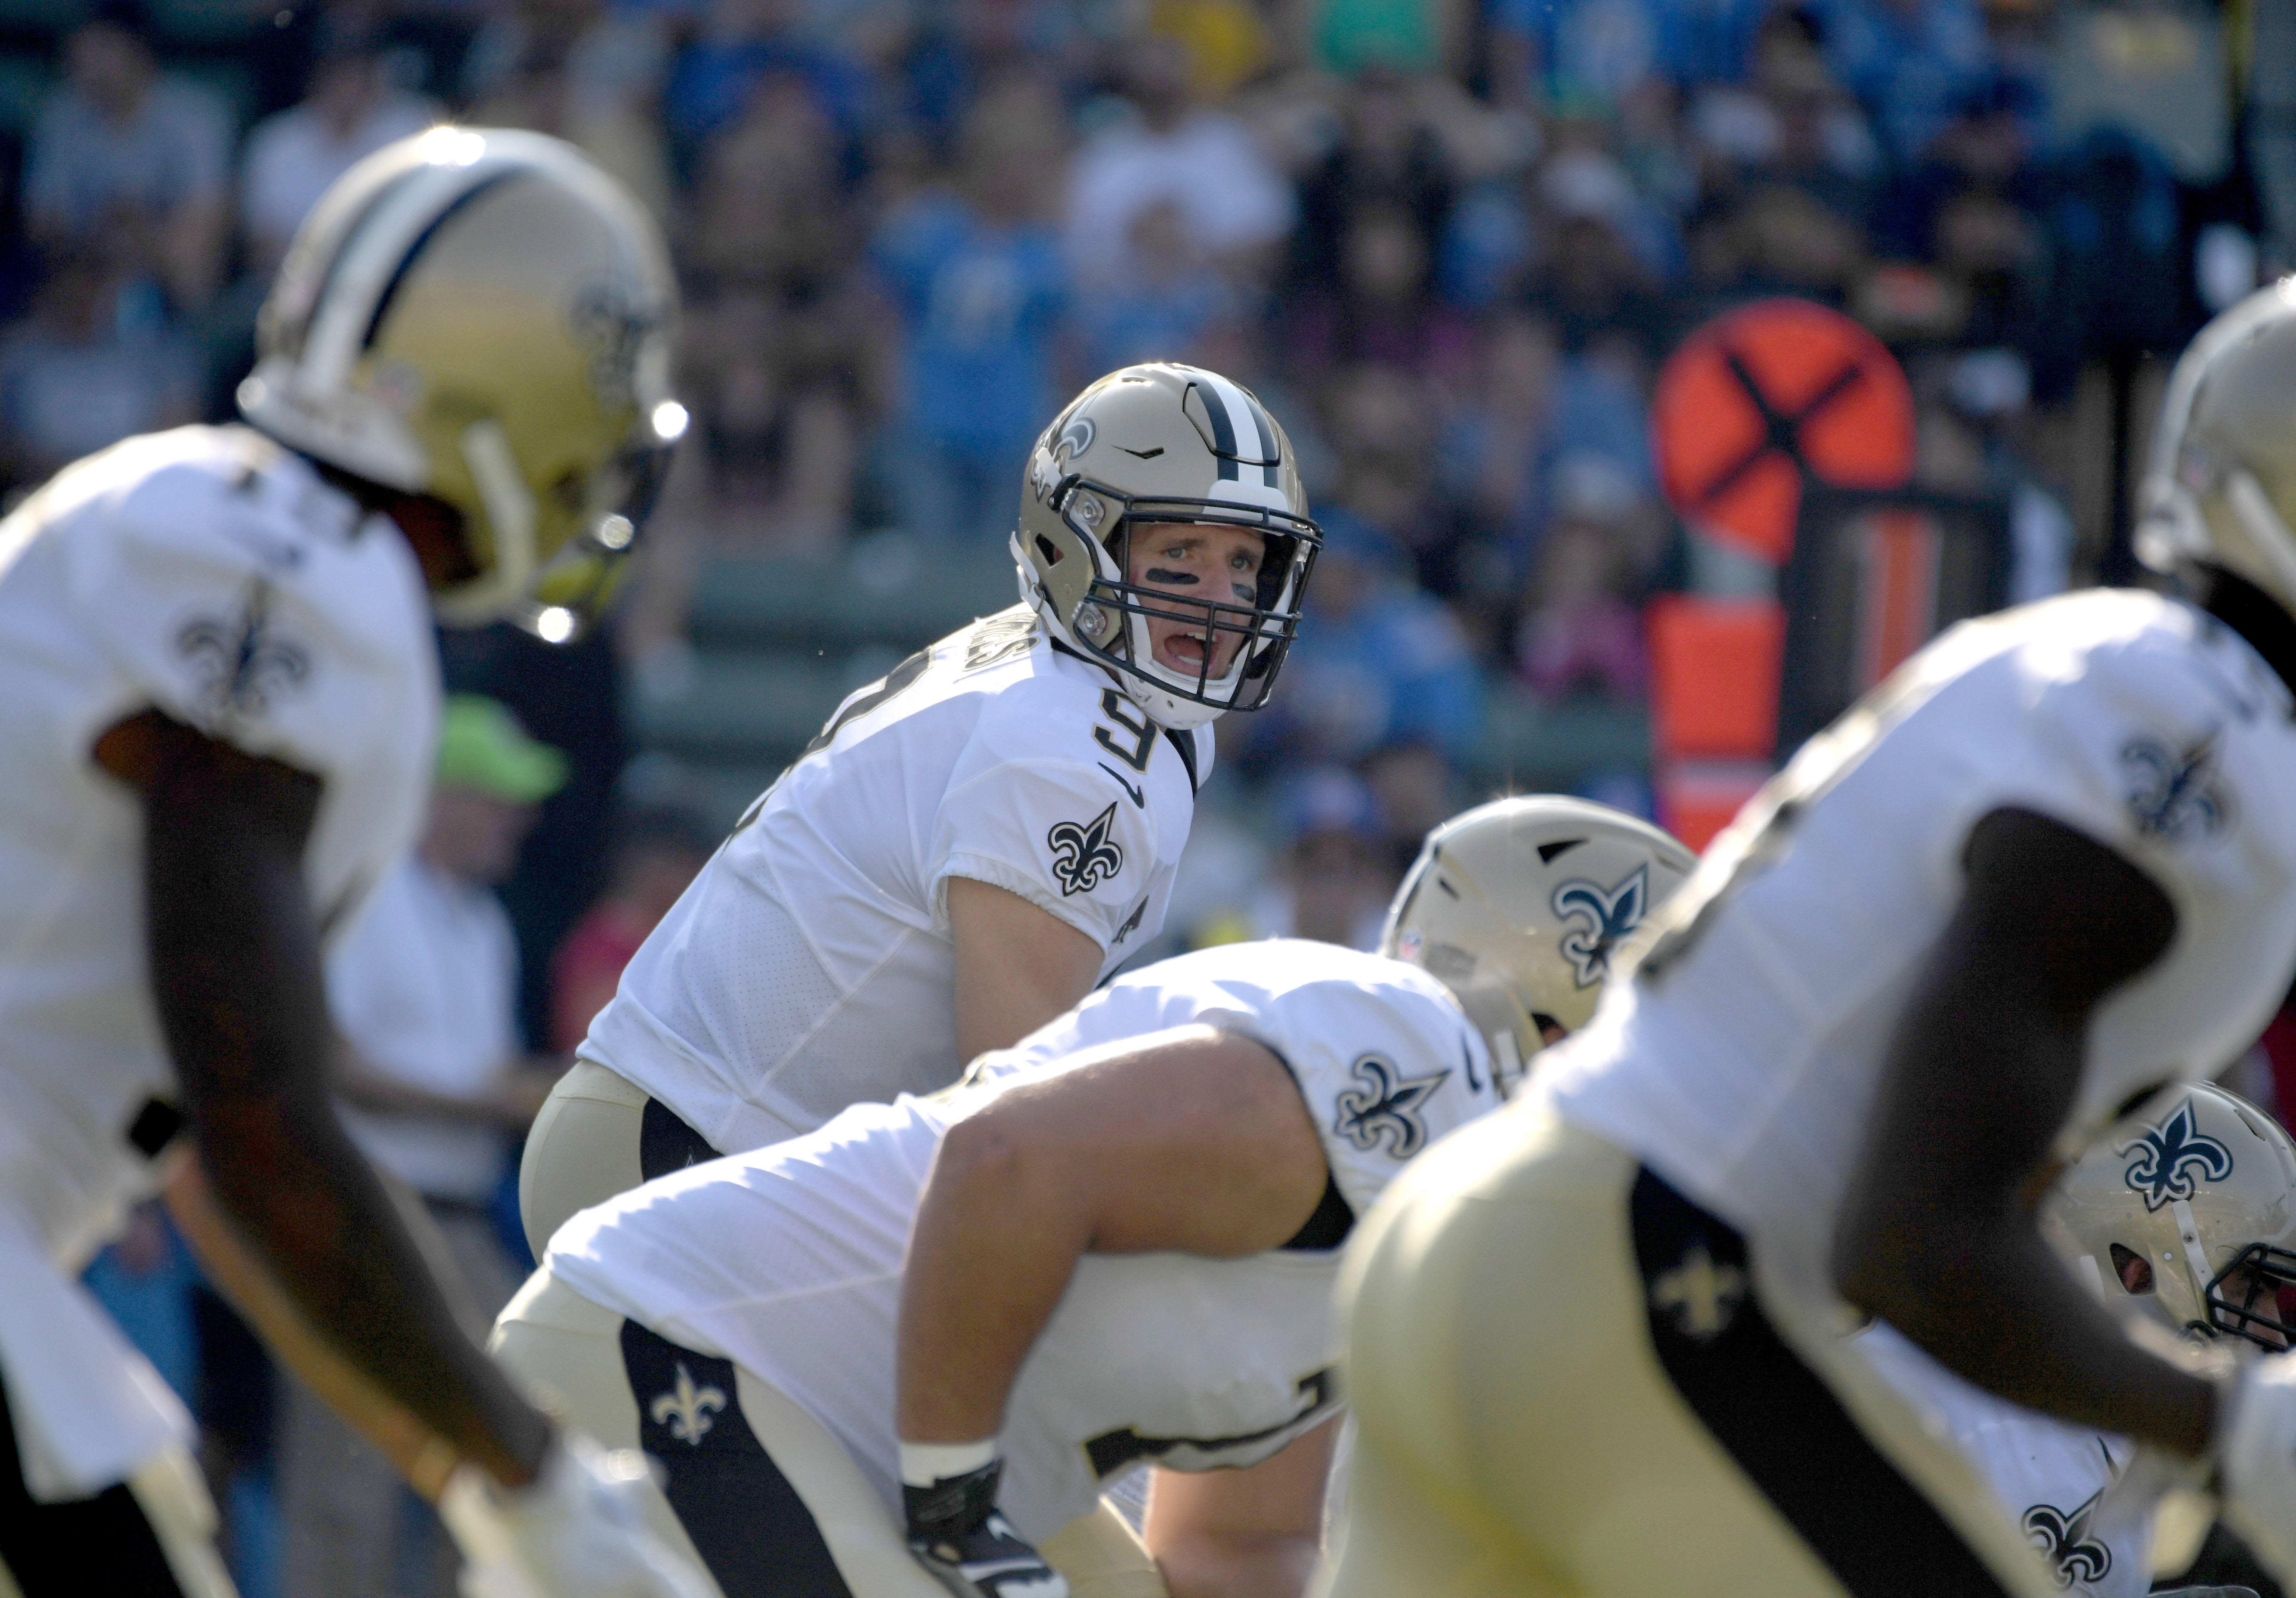 PHOTOS: Brees sharp as Saints cruise to 36-7 win over Chargers in Los Angeles